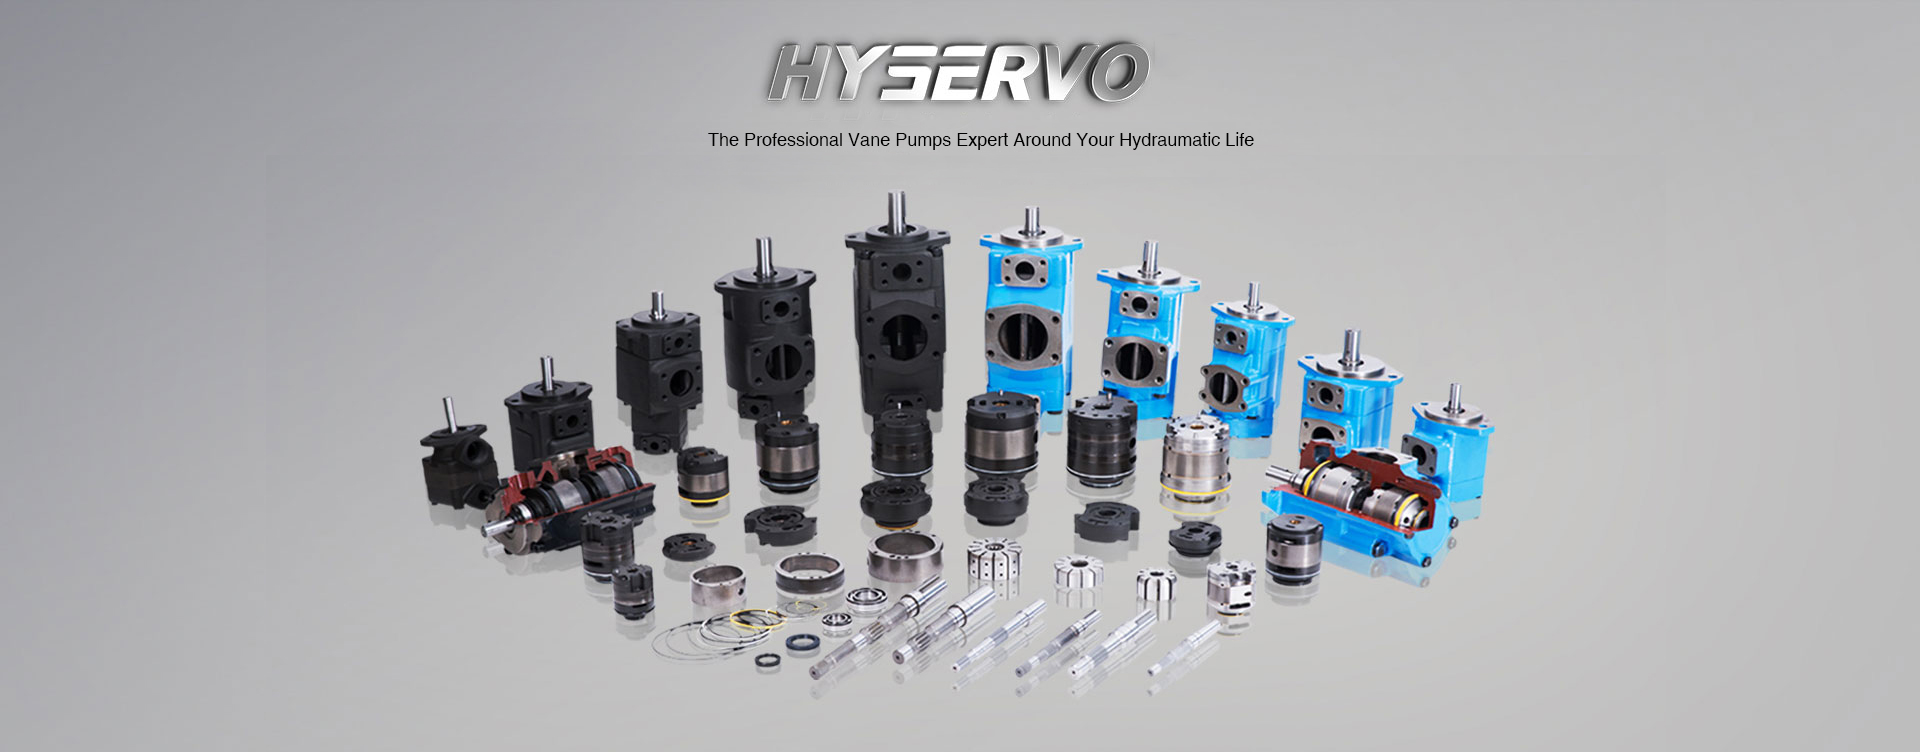 Three Types of Hydraulic Pumps and Their Characteristics are Introduced